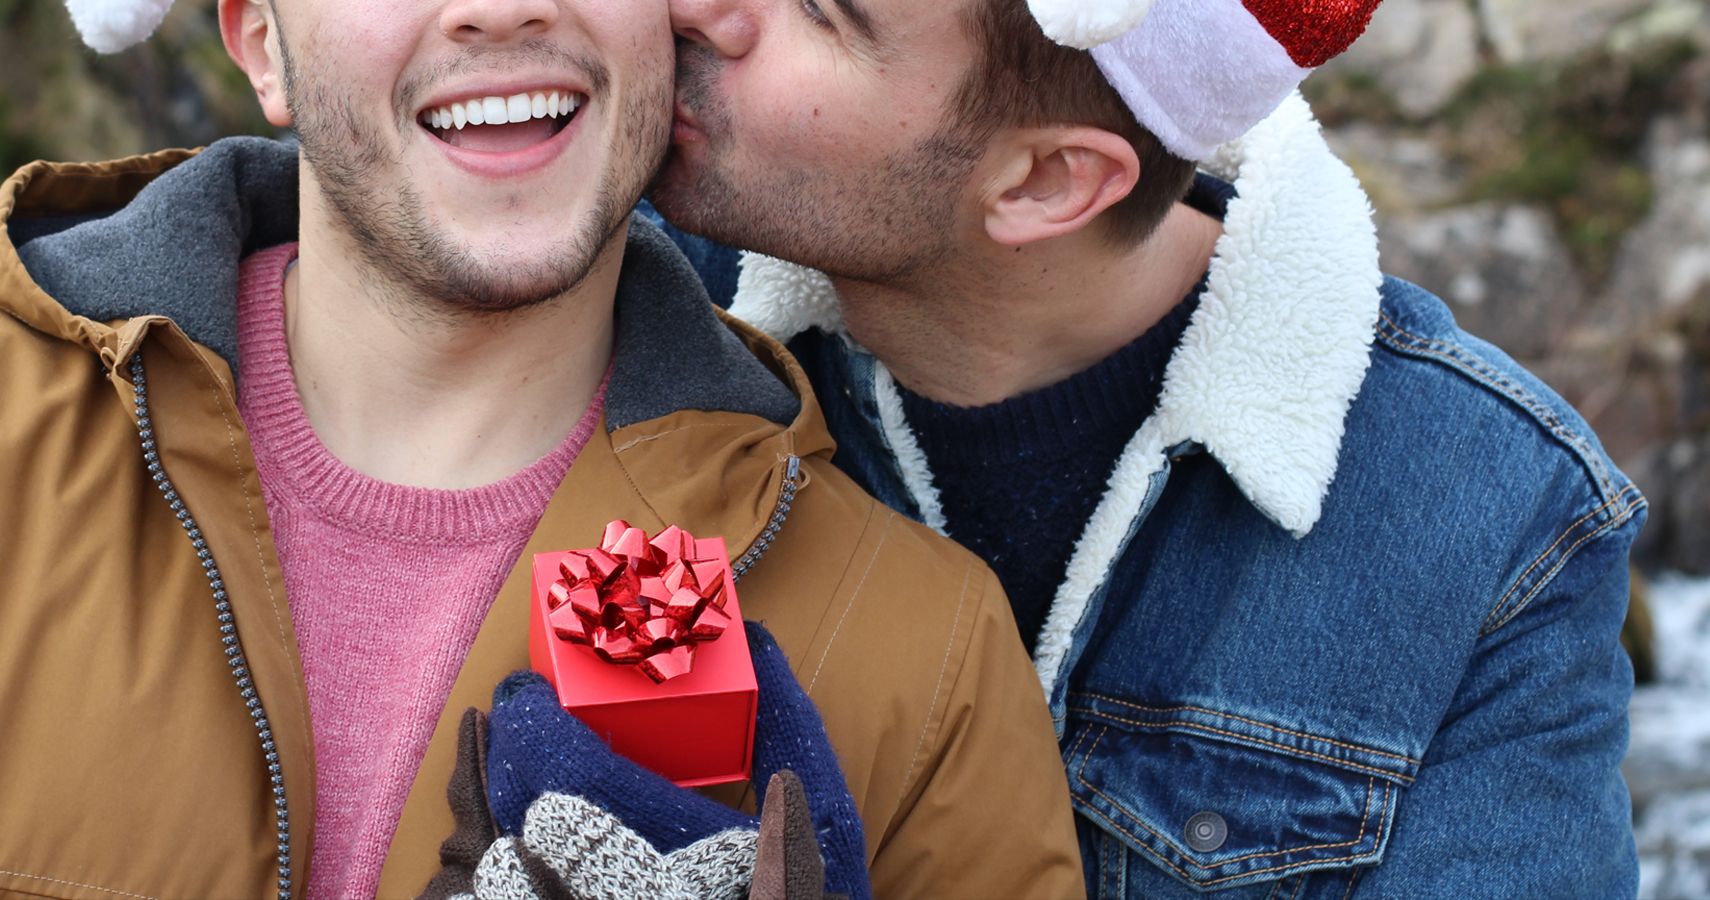 Hallmark Channel’s Christmas Movie About Gay Soon-To-Be Parents